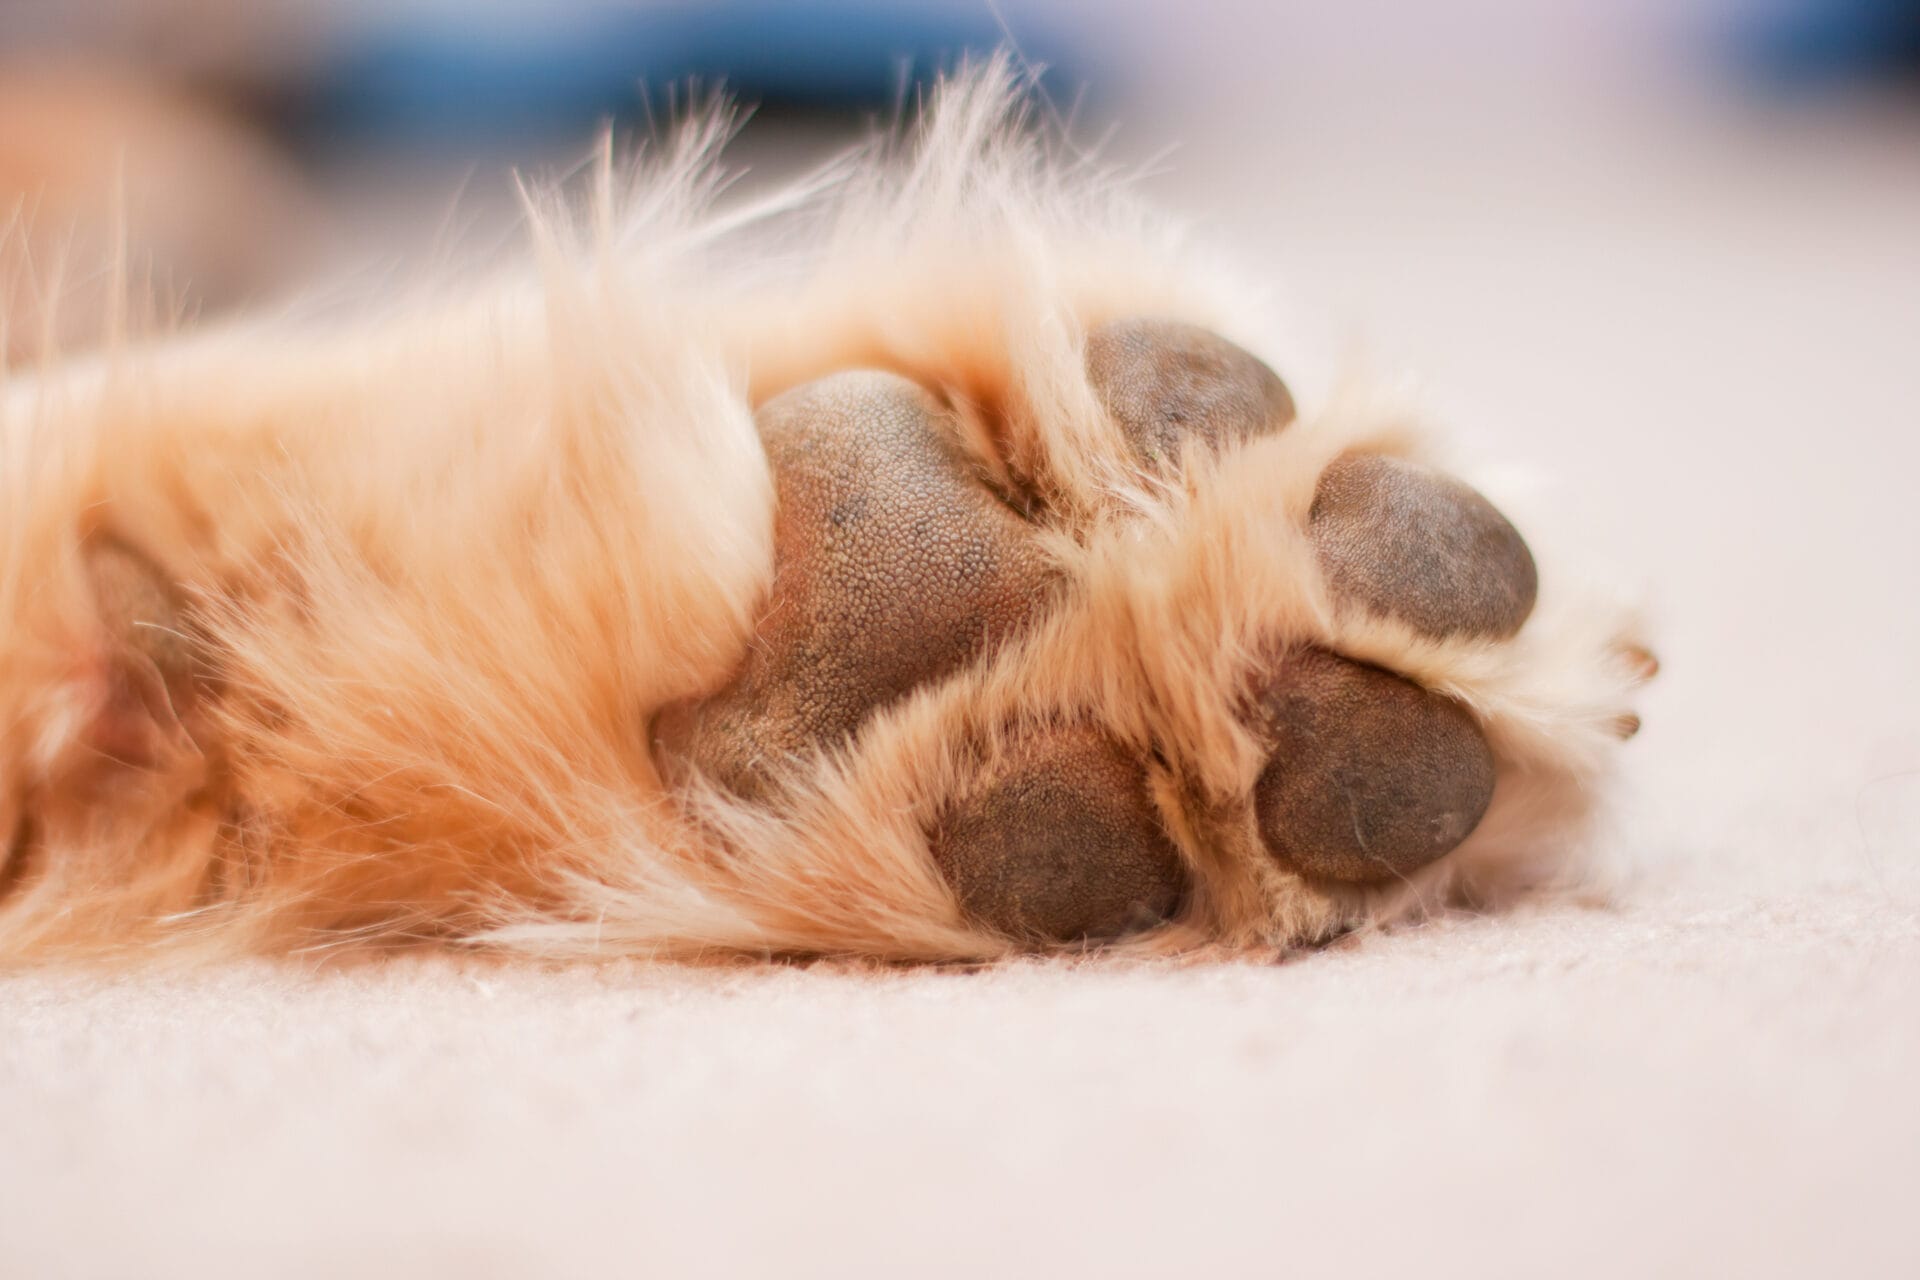 Paws that smell like fritos sideways on the carpeted floor